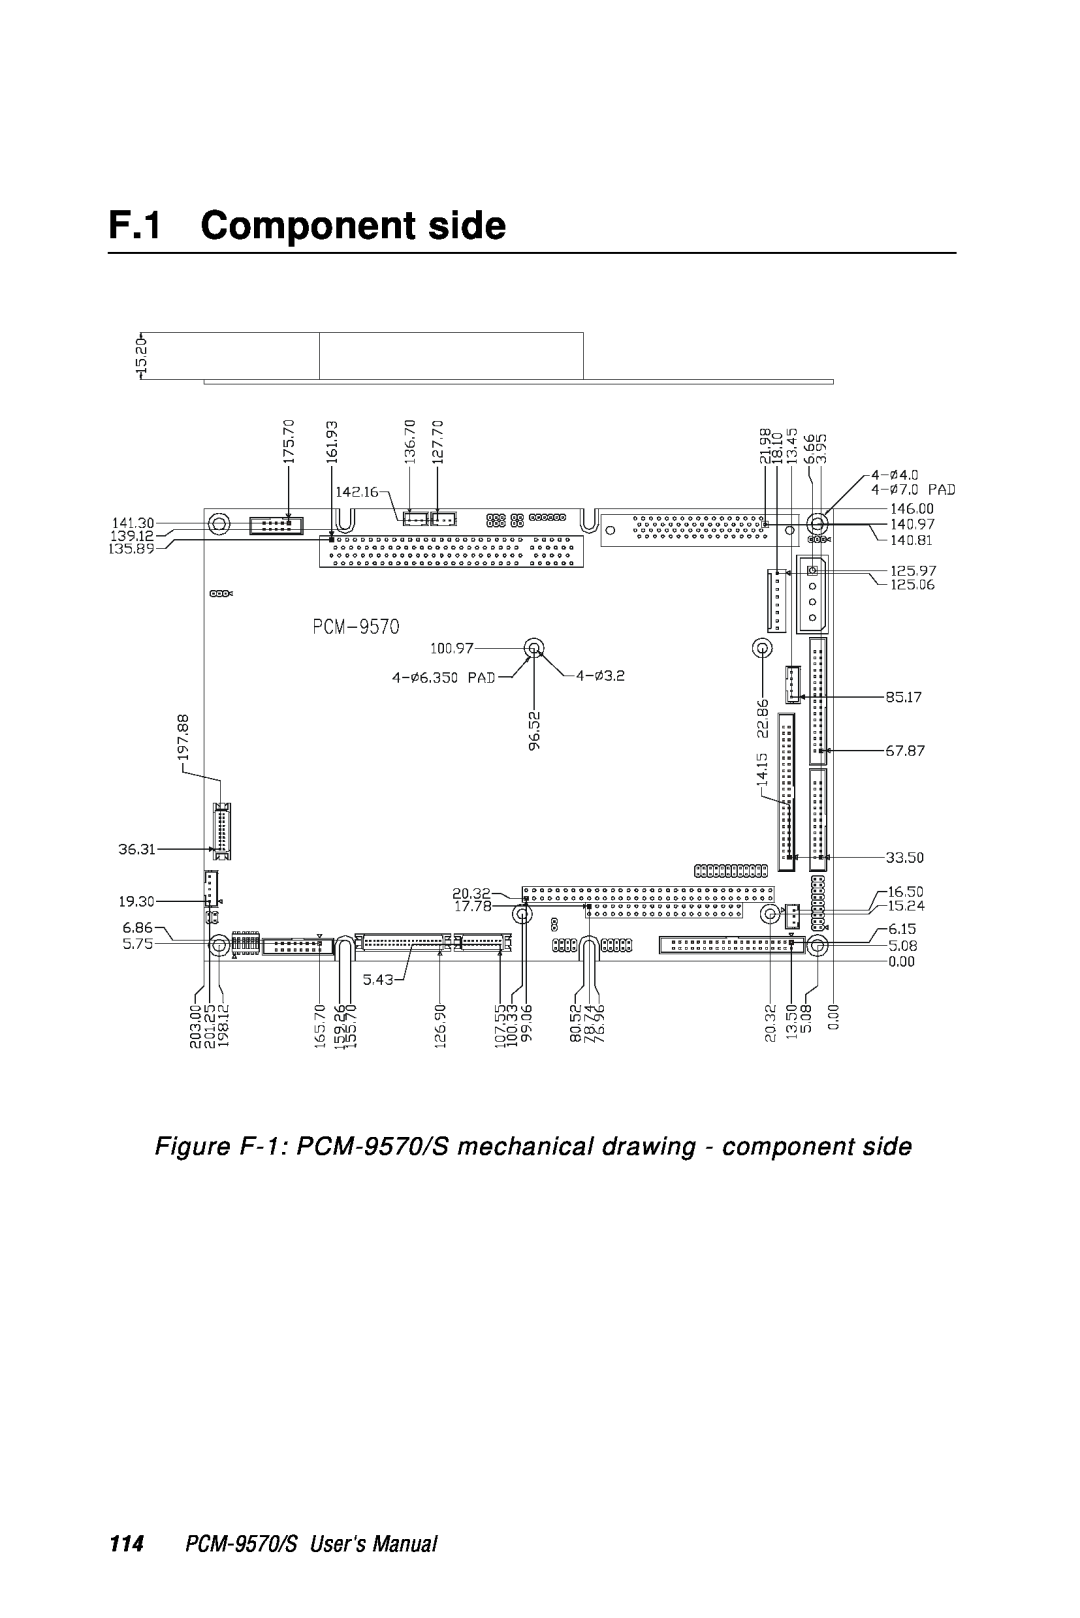 Advantech 2006957006 5th Edition user manual F.1 Component side, Figure F-1 PCM-9570/S mechanical drawing - component side 